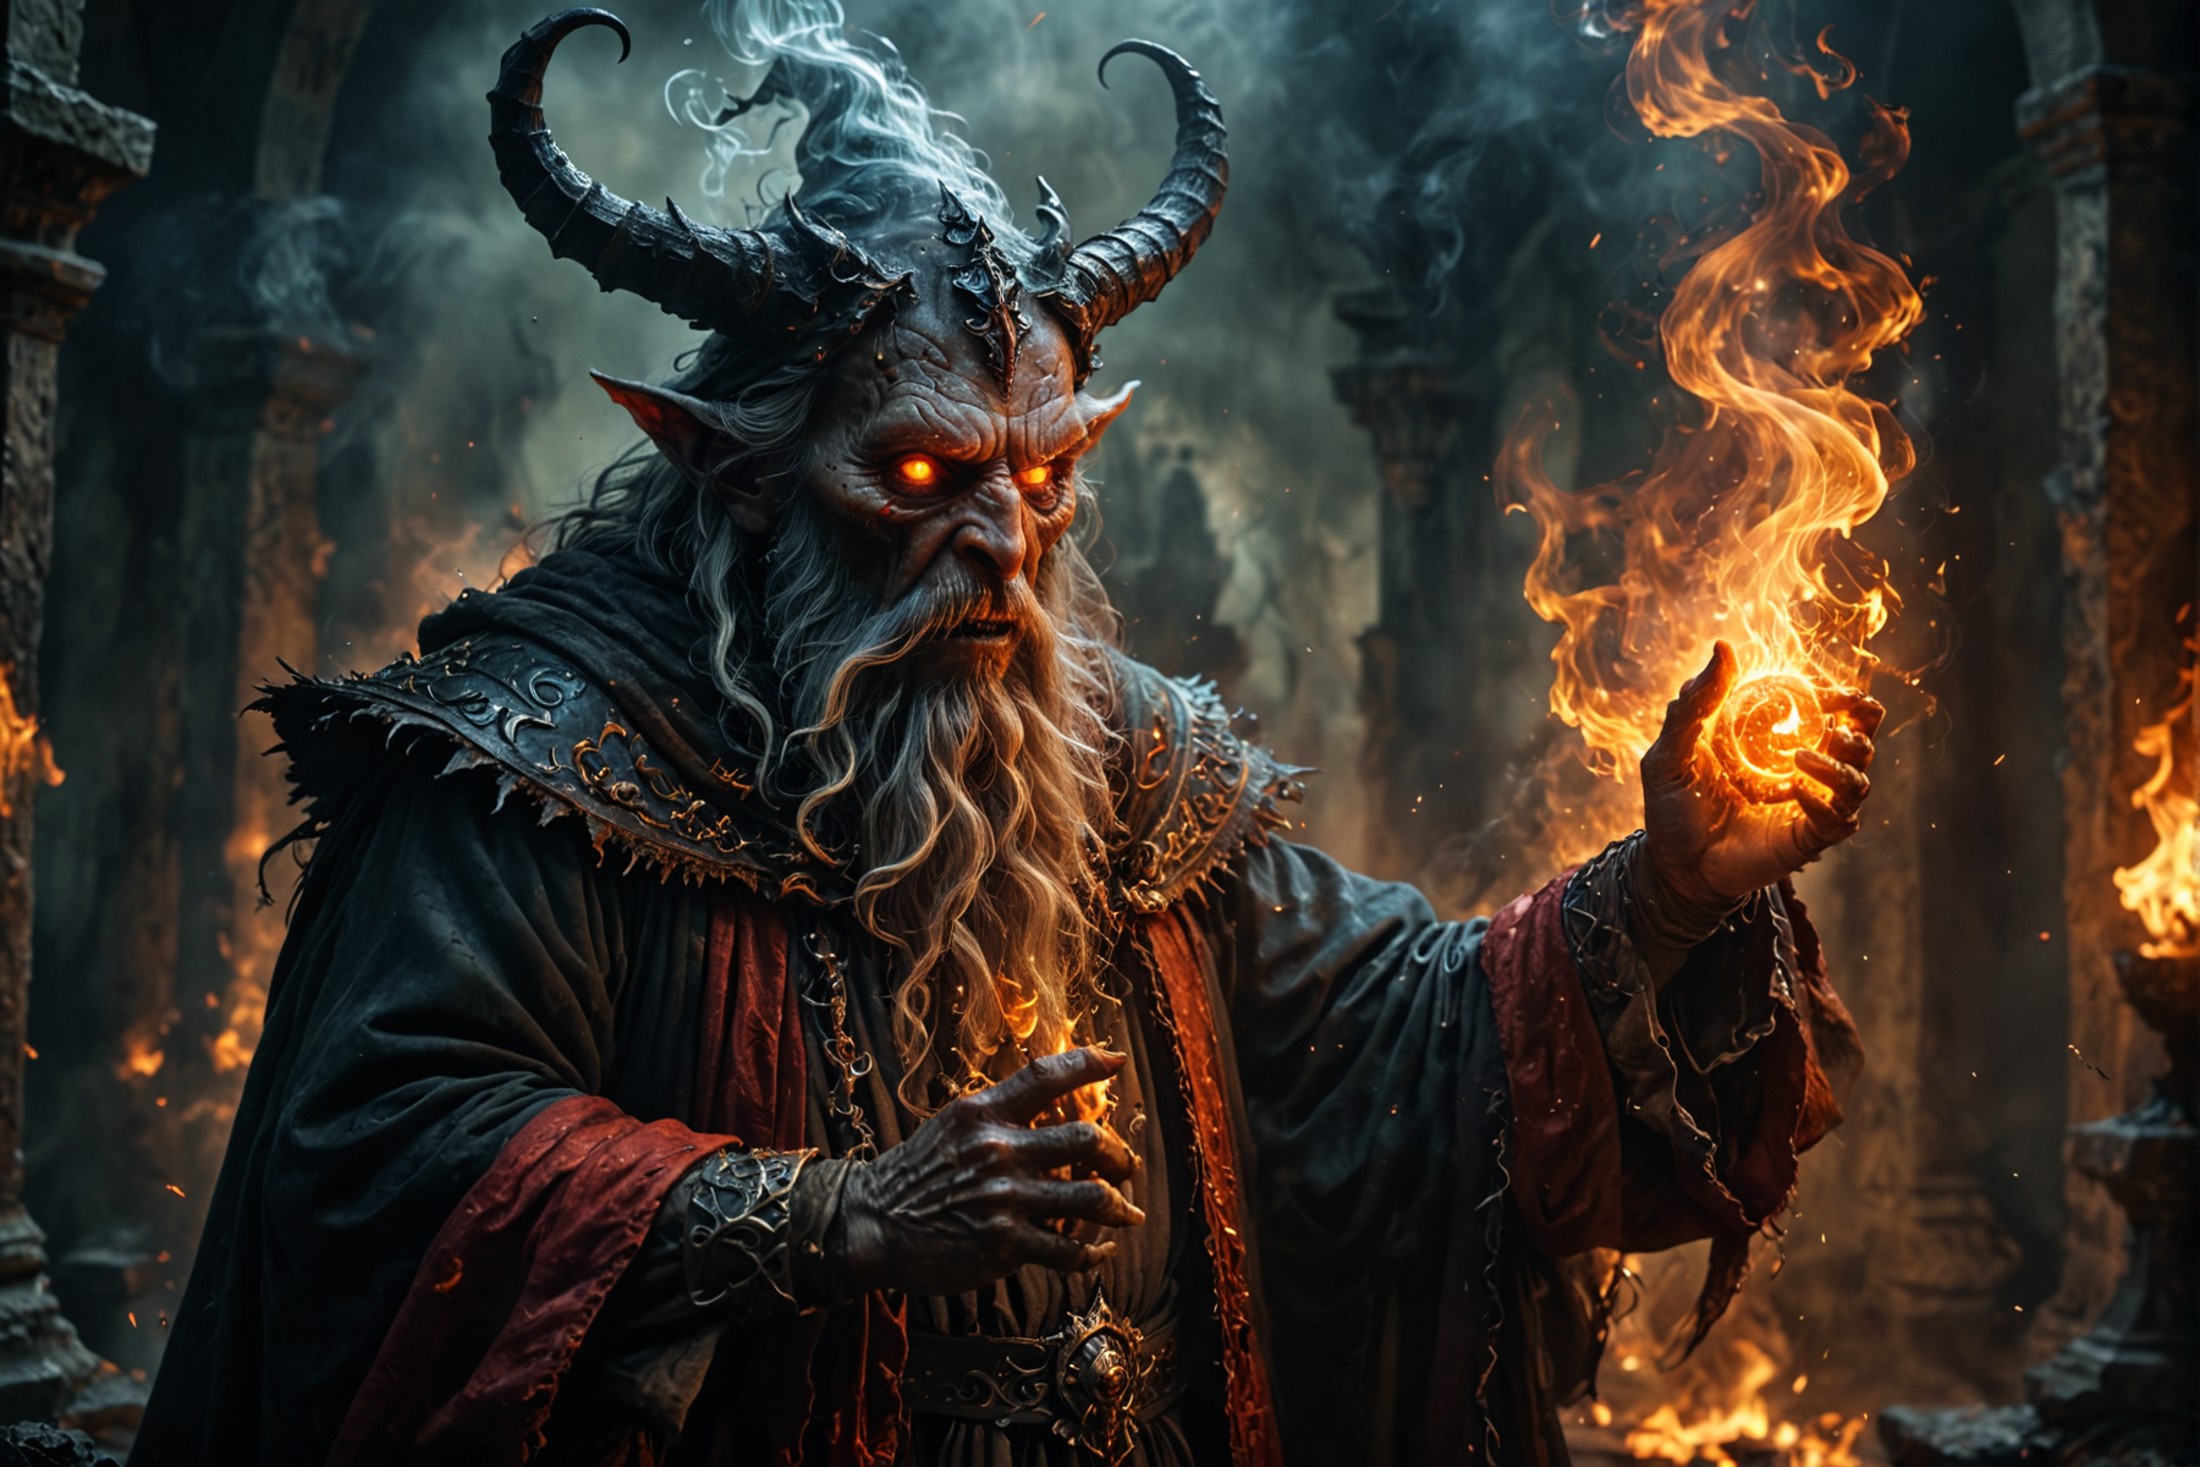 old wizard summoning a demon, partially transparent devil materializing, fierce fiery flaming glowing eyes
smokey, mysteri...